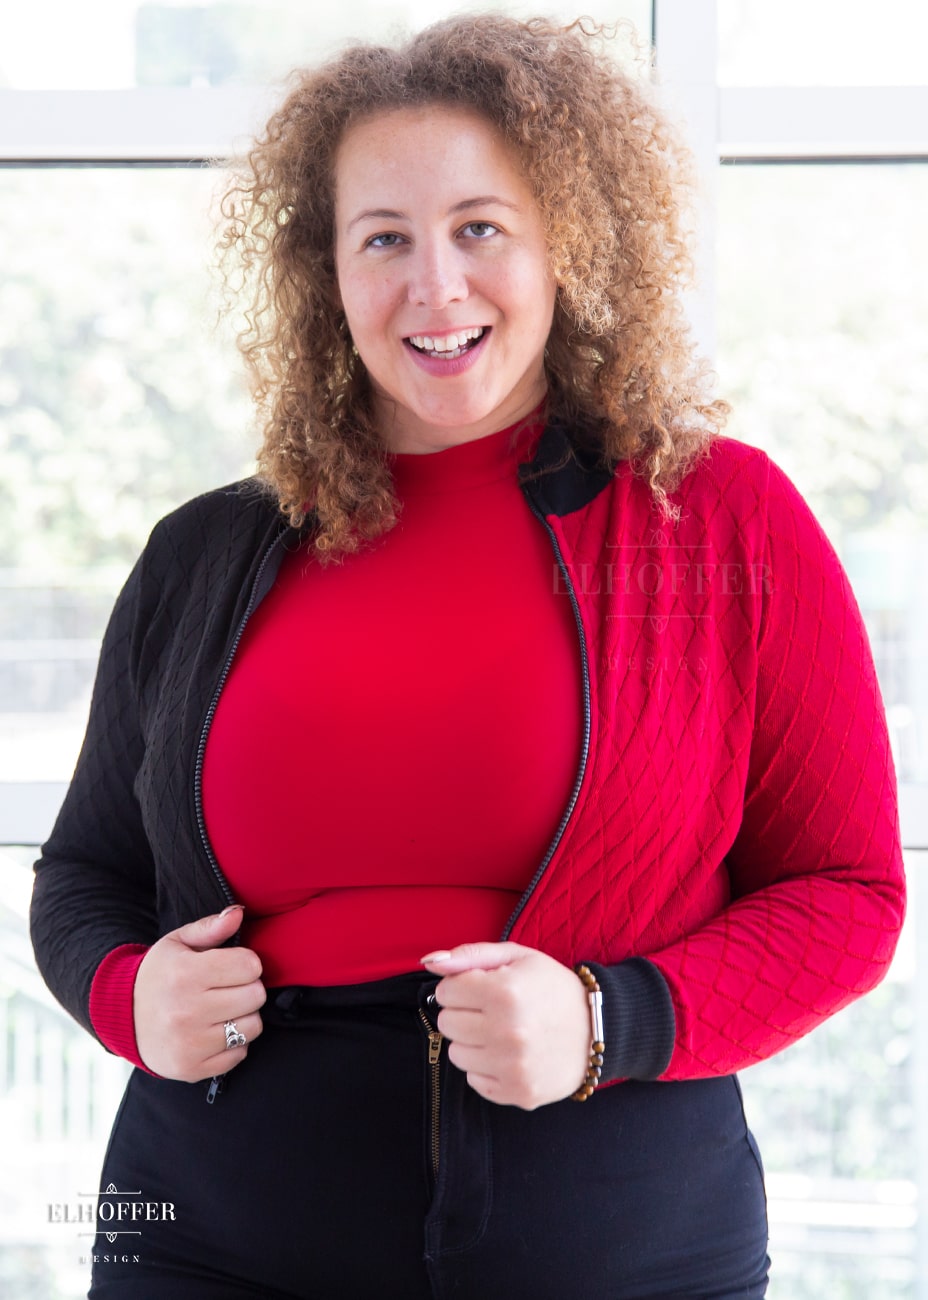 Anastasia, a curly haired, medium-skinned size XL model, is wearing our Kwinn zip up cardigan. It is a zip up cardigan with fitted long sleeves and a high neckline. The knit body has a diamond pattern, one side is black, the other red, with opposite colored cuffs.